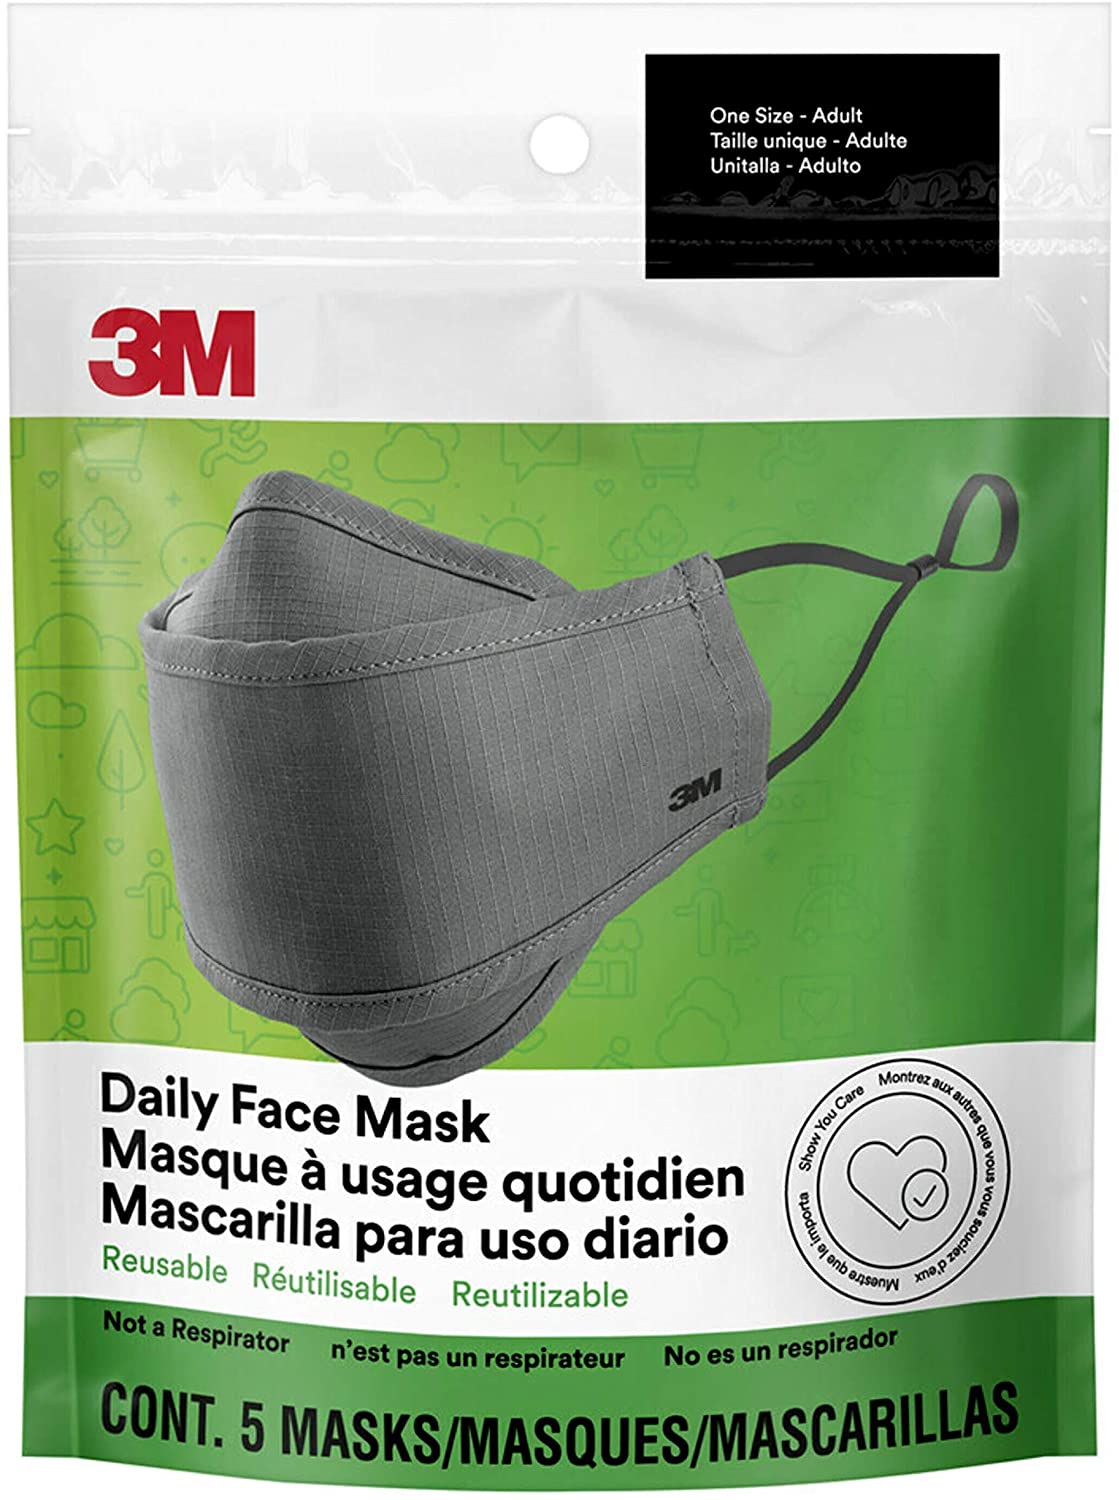 3M Daily Face Mask, Reusable, Washable, Adjustable Ear Loops, Lightweight Cotton Fabric, 5 Pack, Gray